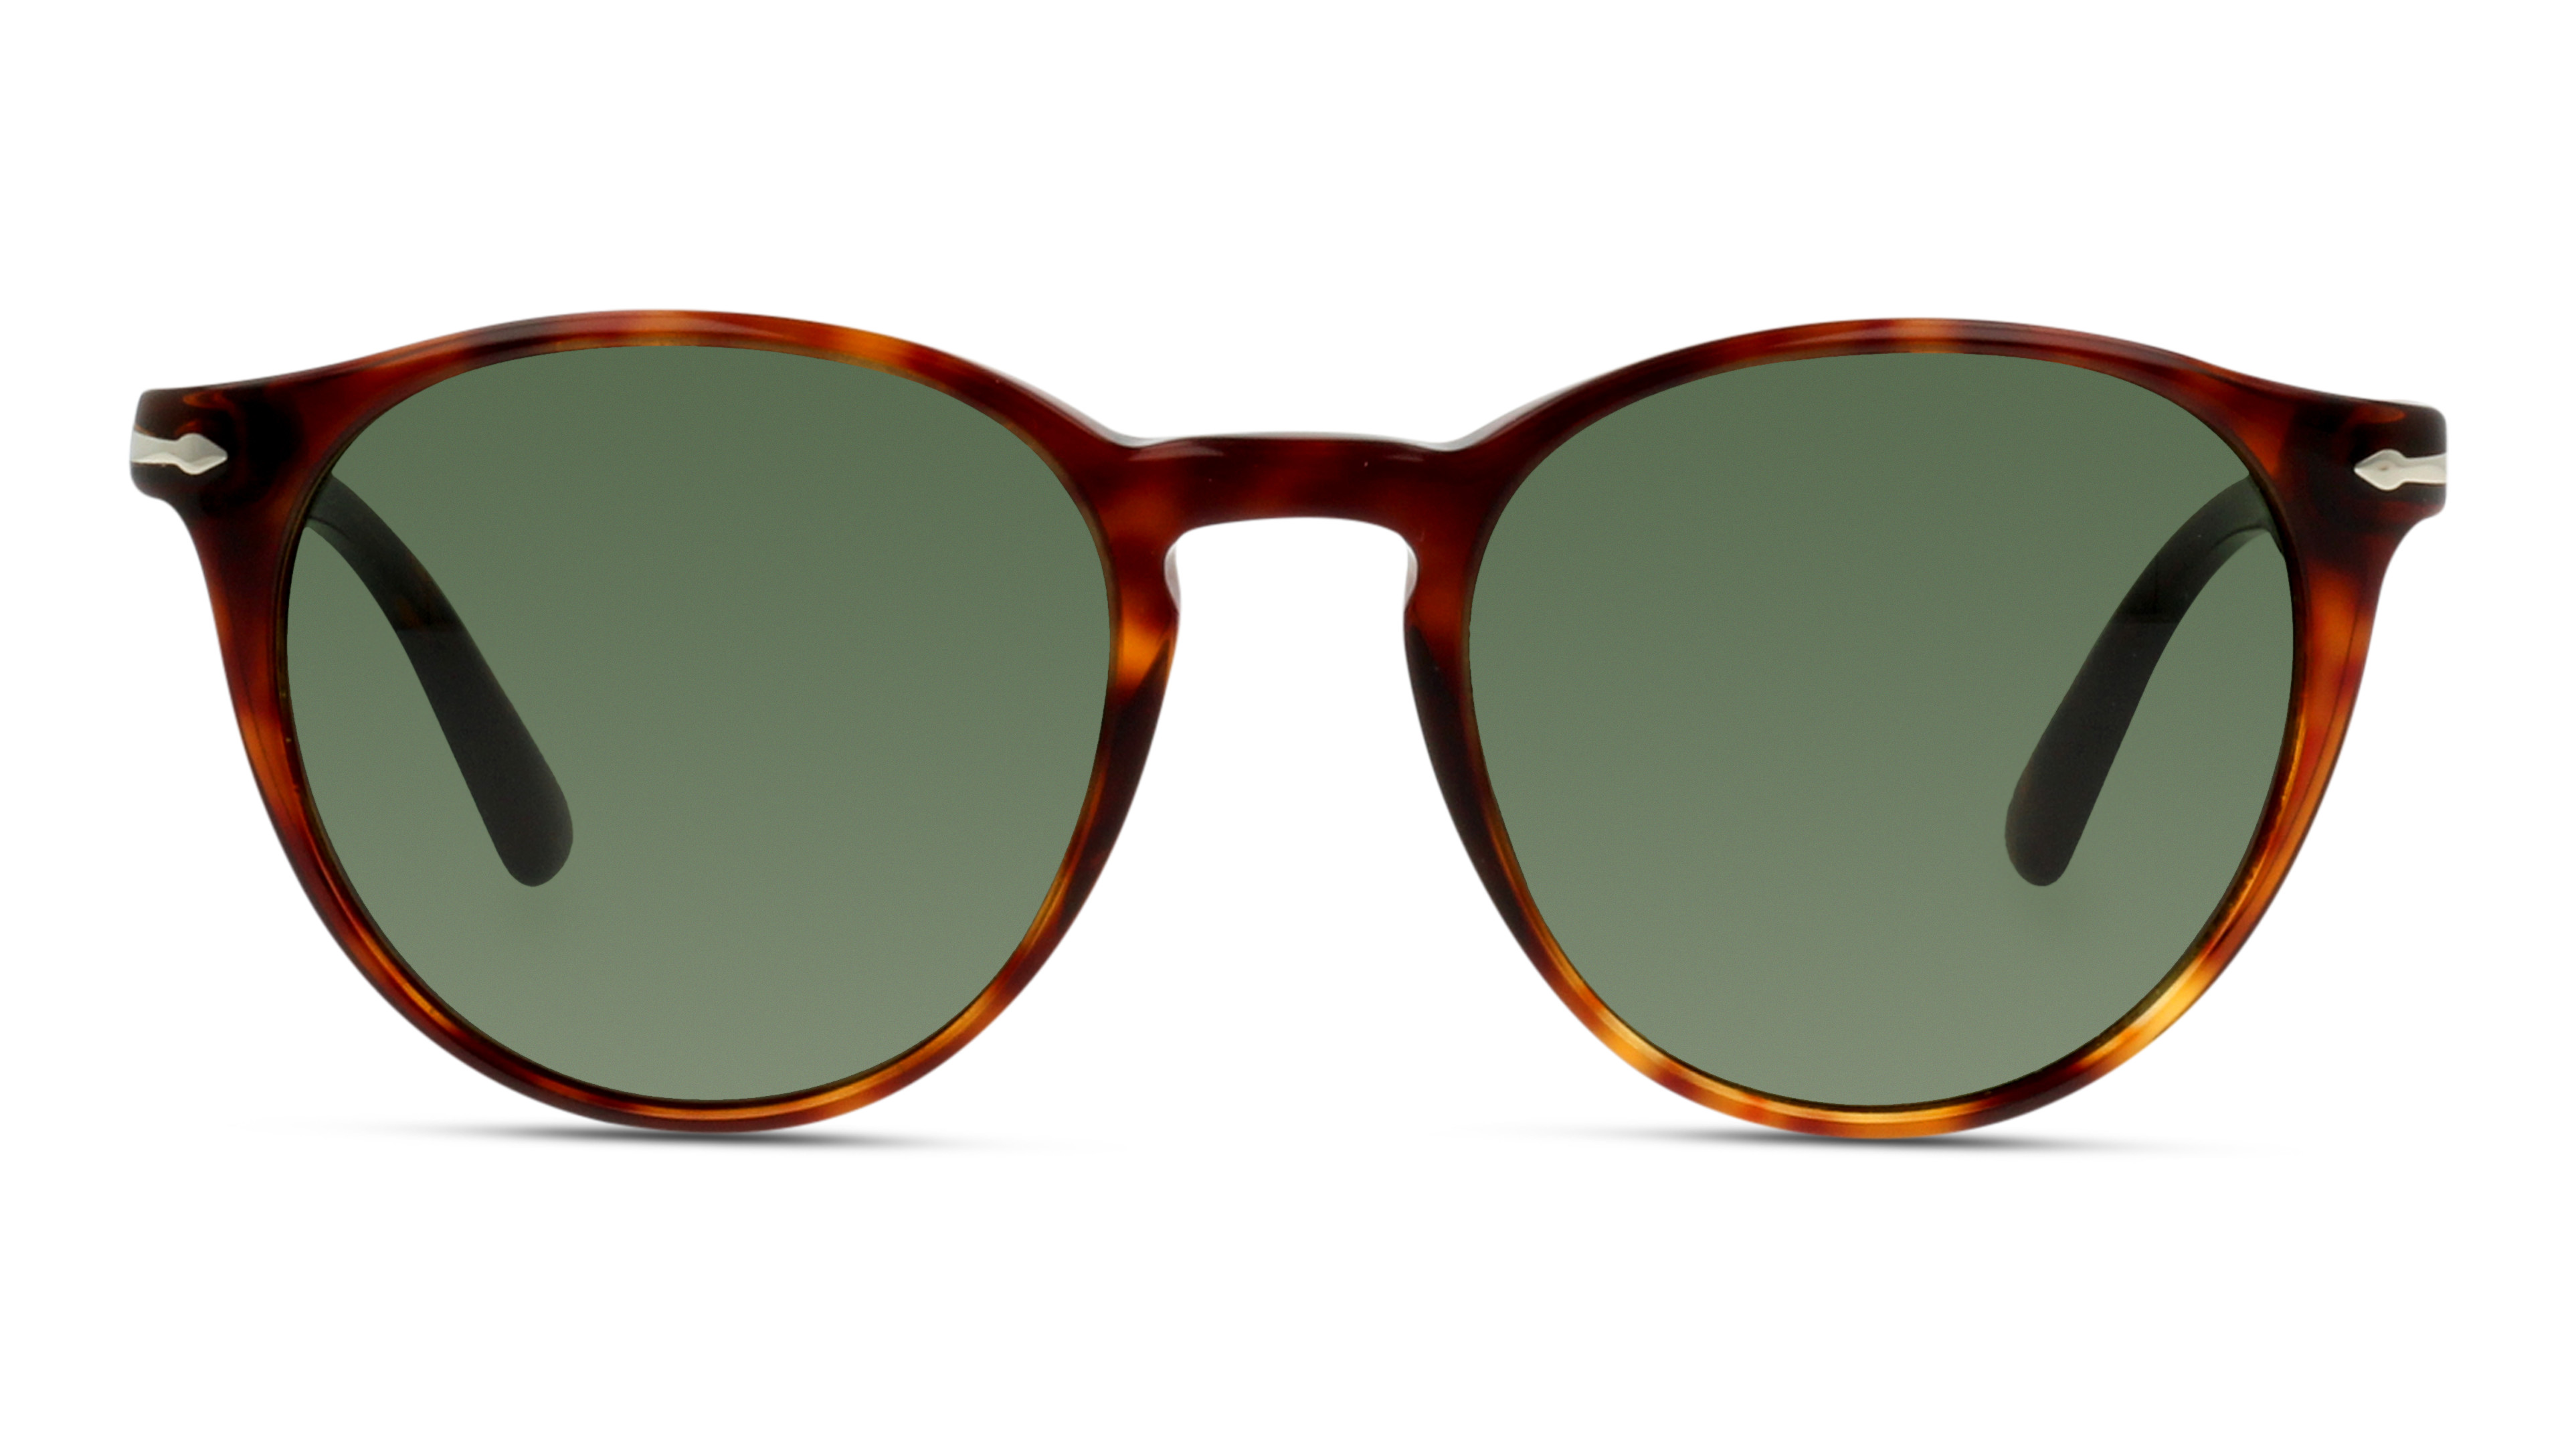 [products.image.front] Persol 0PO3152S 901531 Sonnenbrille